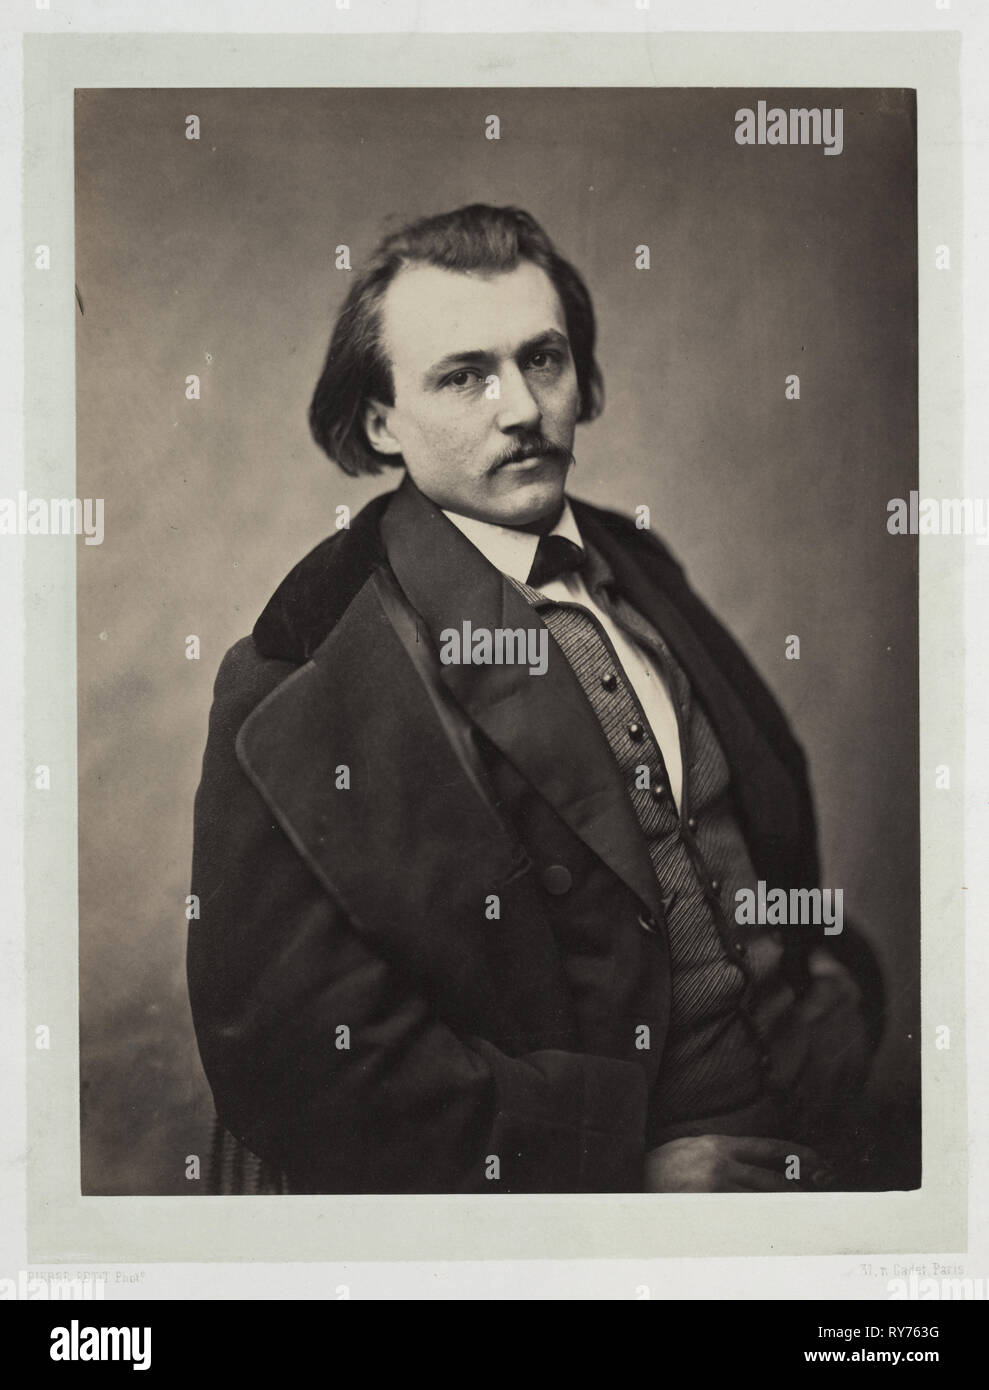 Gustave Doré, 1860. Pierre Petit (French, 1832-1909). Albumen print from wet collodion negative; image: 25 x 19 cm (9 13/16 x 7 1/2 in.); paper: 48.1 x 31 cm (18 15/16 x 12 3/16 in.); matted: 55.9 x 45.7 cm (22 x 18 in Stock Photo